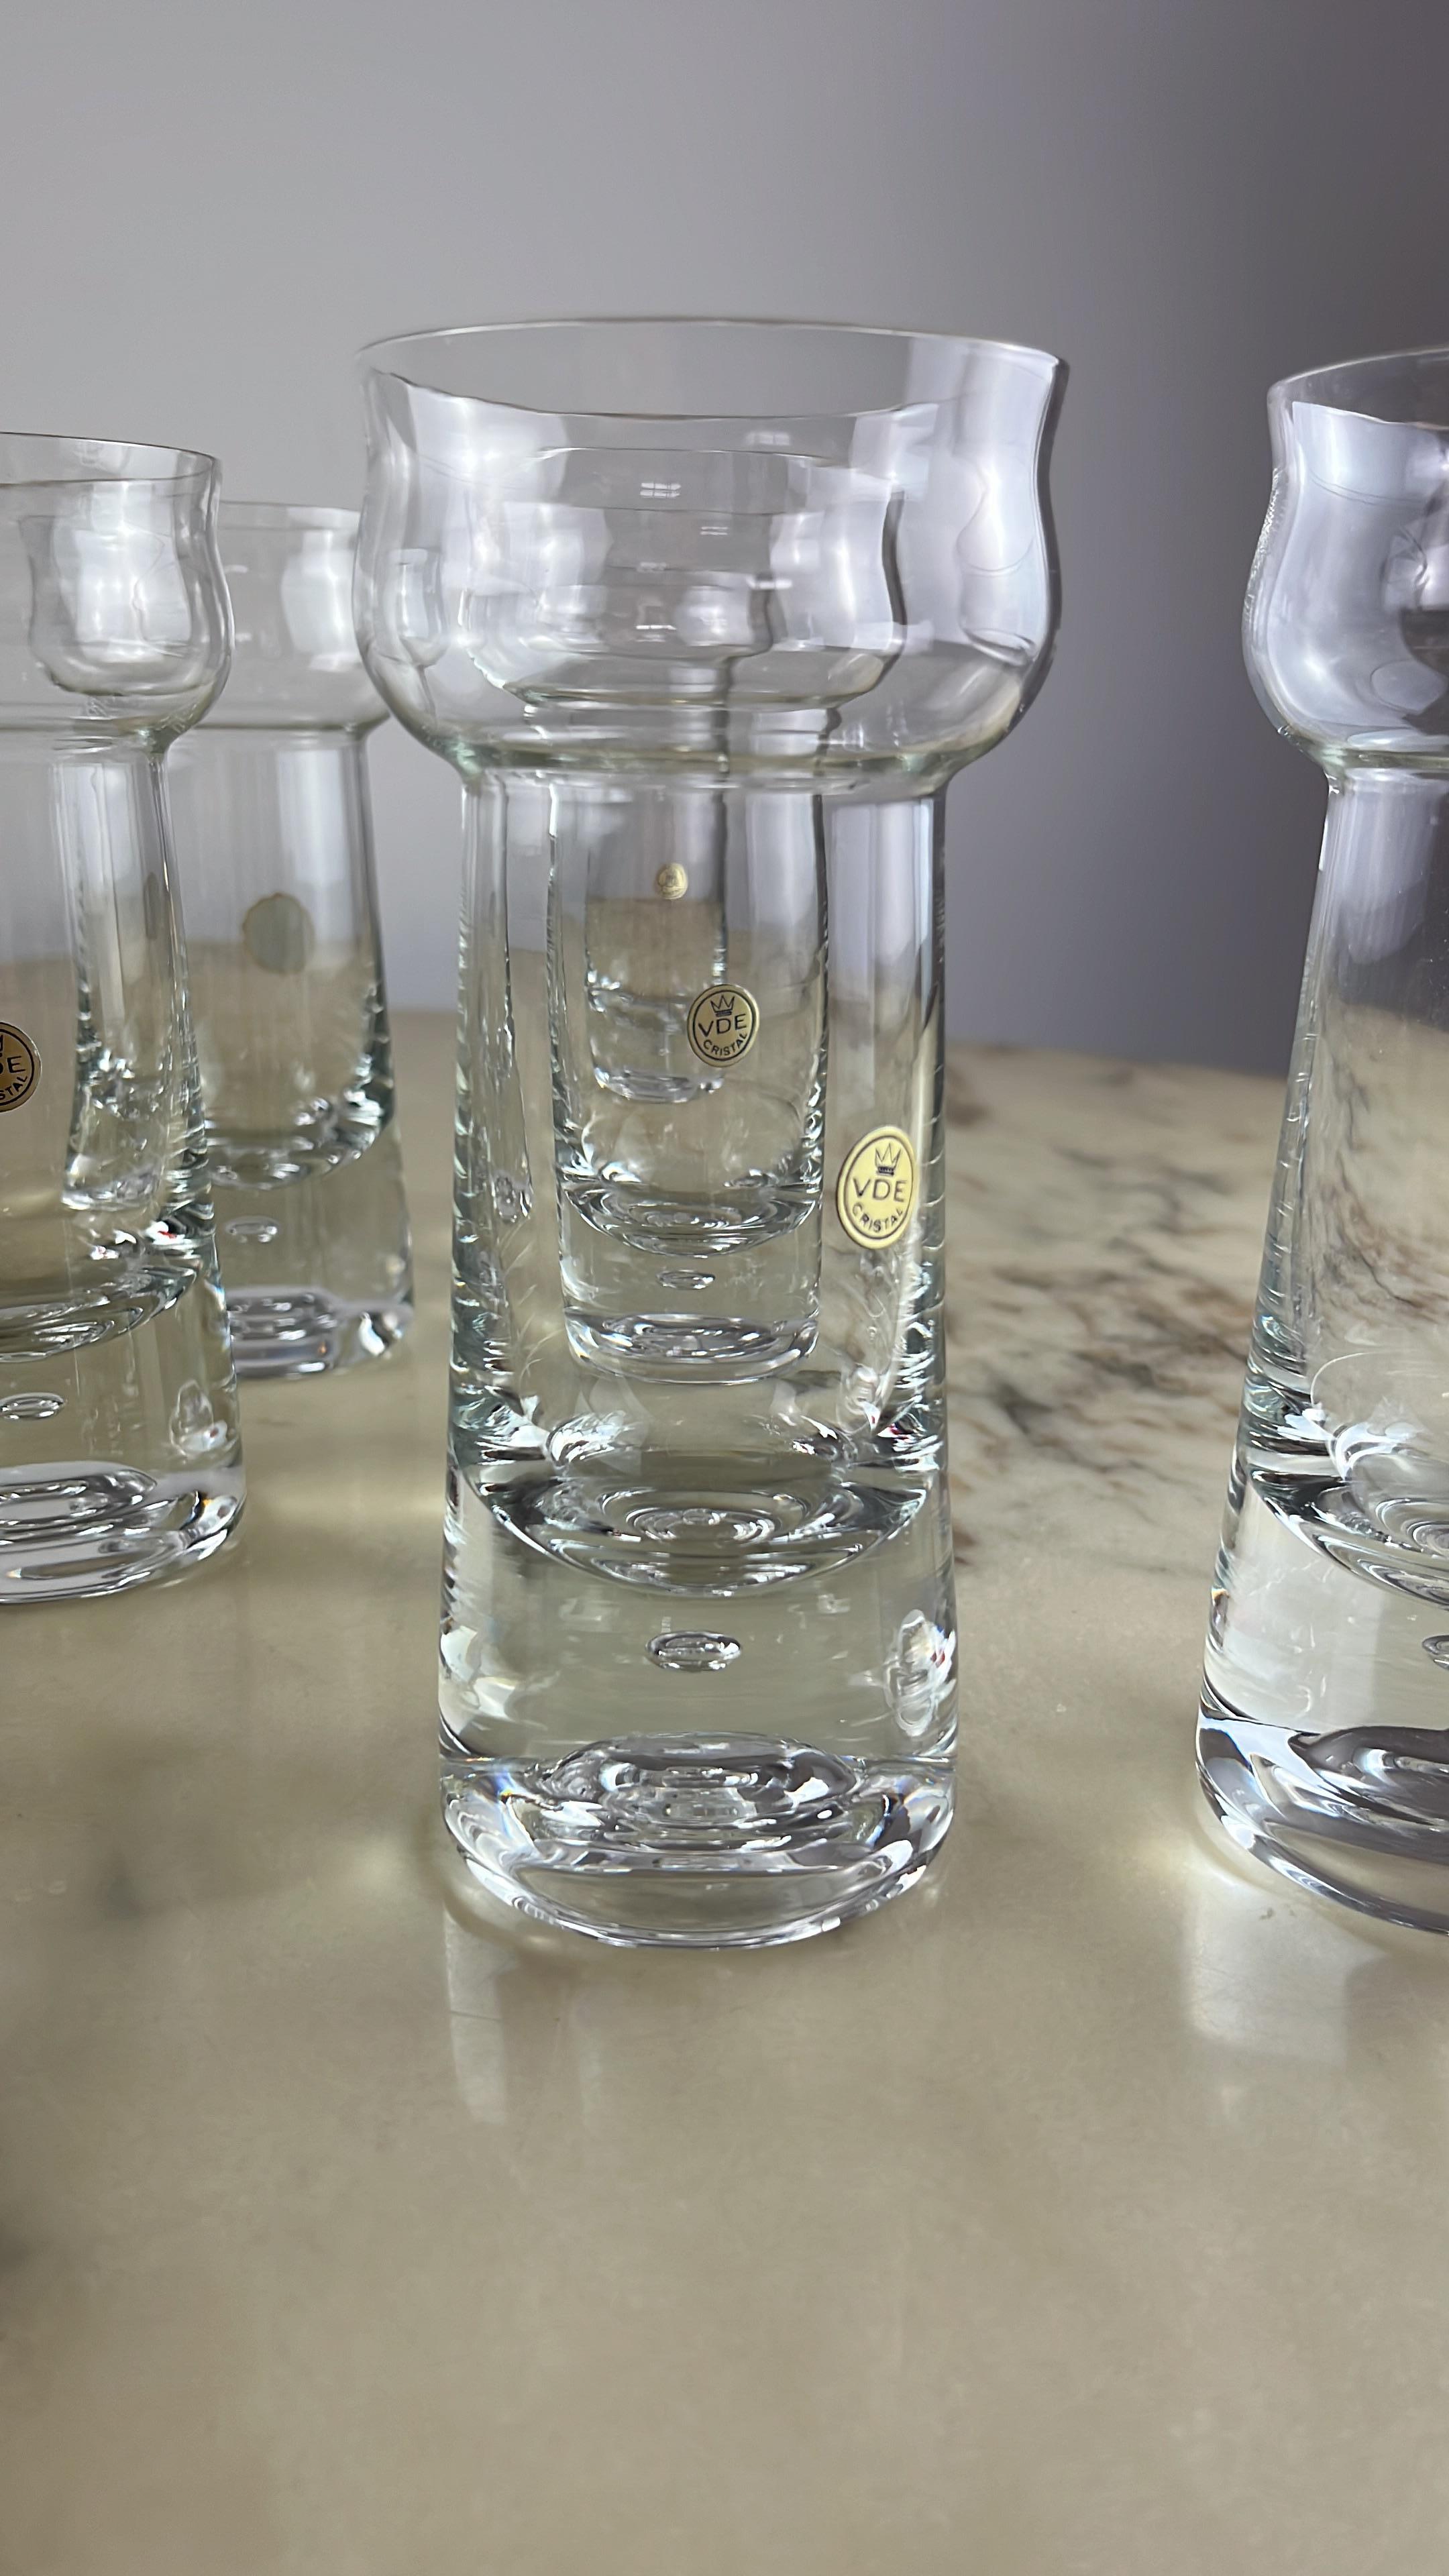 Six tall crystal glasses, Czech Republic, 1980.
In excellent condition.